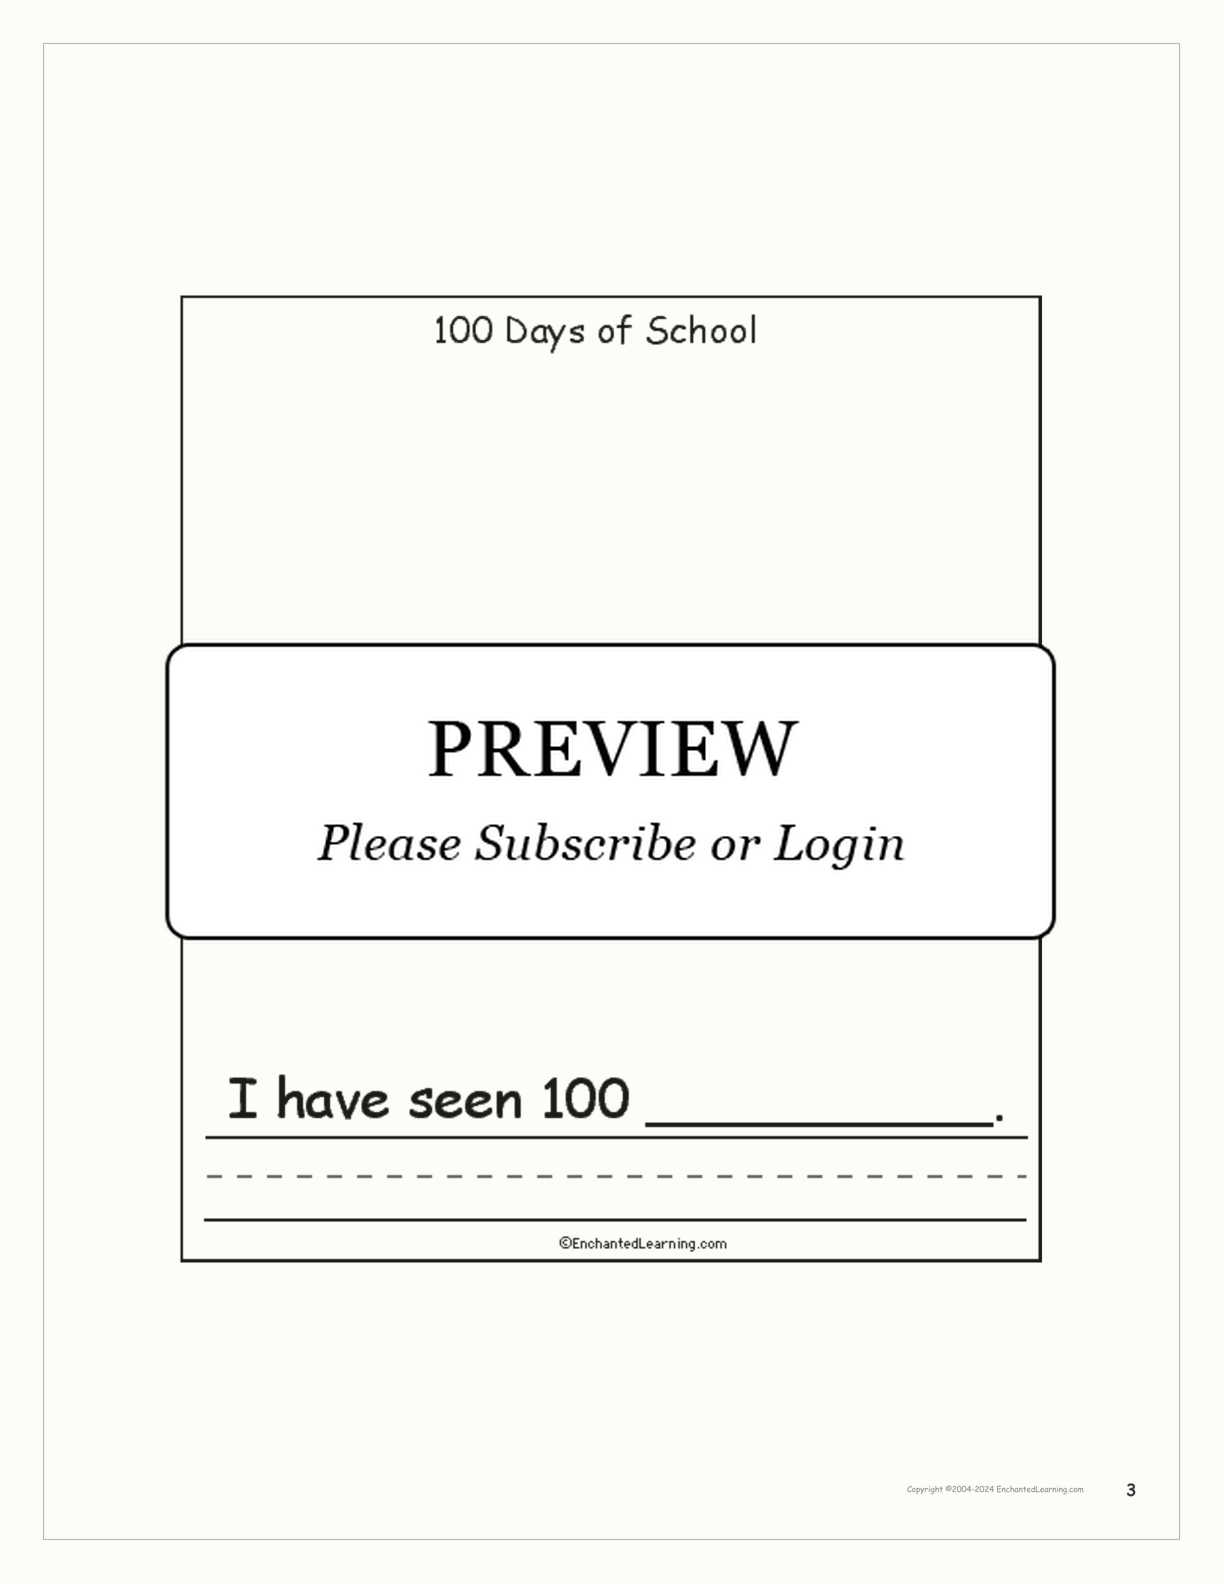 100 Days of School interactive worksheet page 3